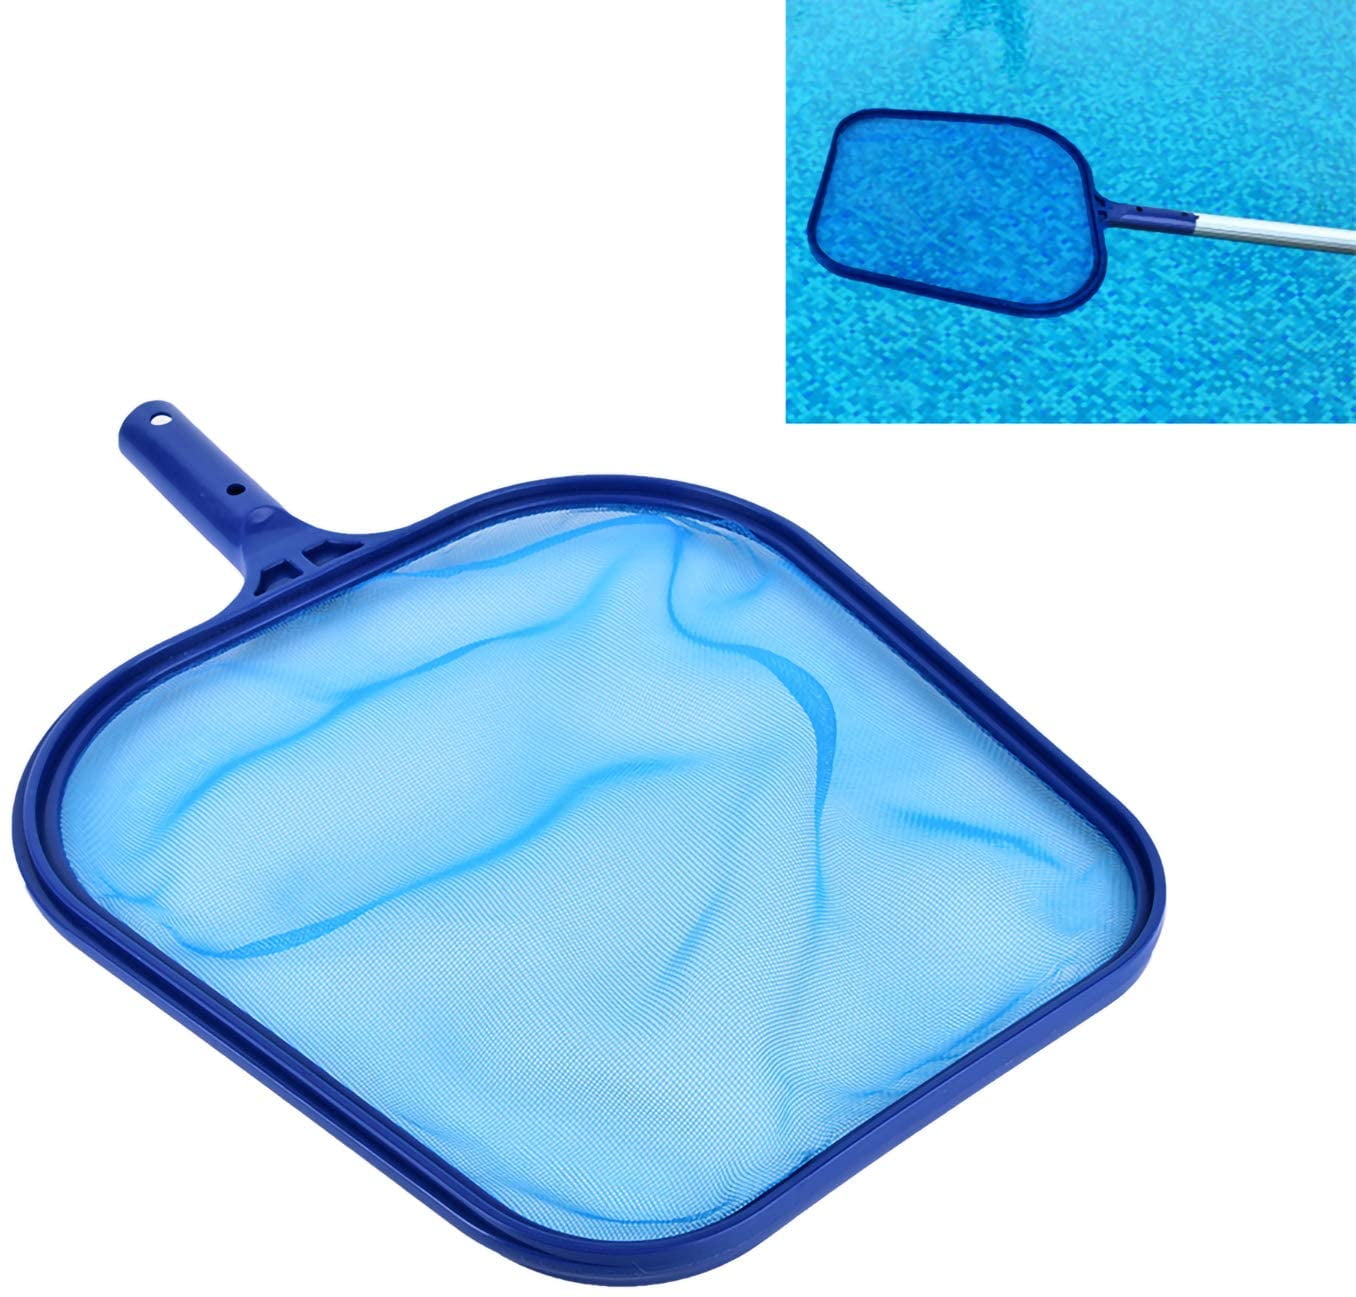 Ponds & Pool Swimming Pool Cleaner Supplies Skimmer Leaf screen with 17-41 inch telescopic pole Professional Pool Net Skimmer Fine Mesh Blue Pool Skimmer Swimming Net with Pole Clean Spas 